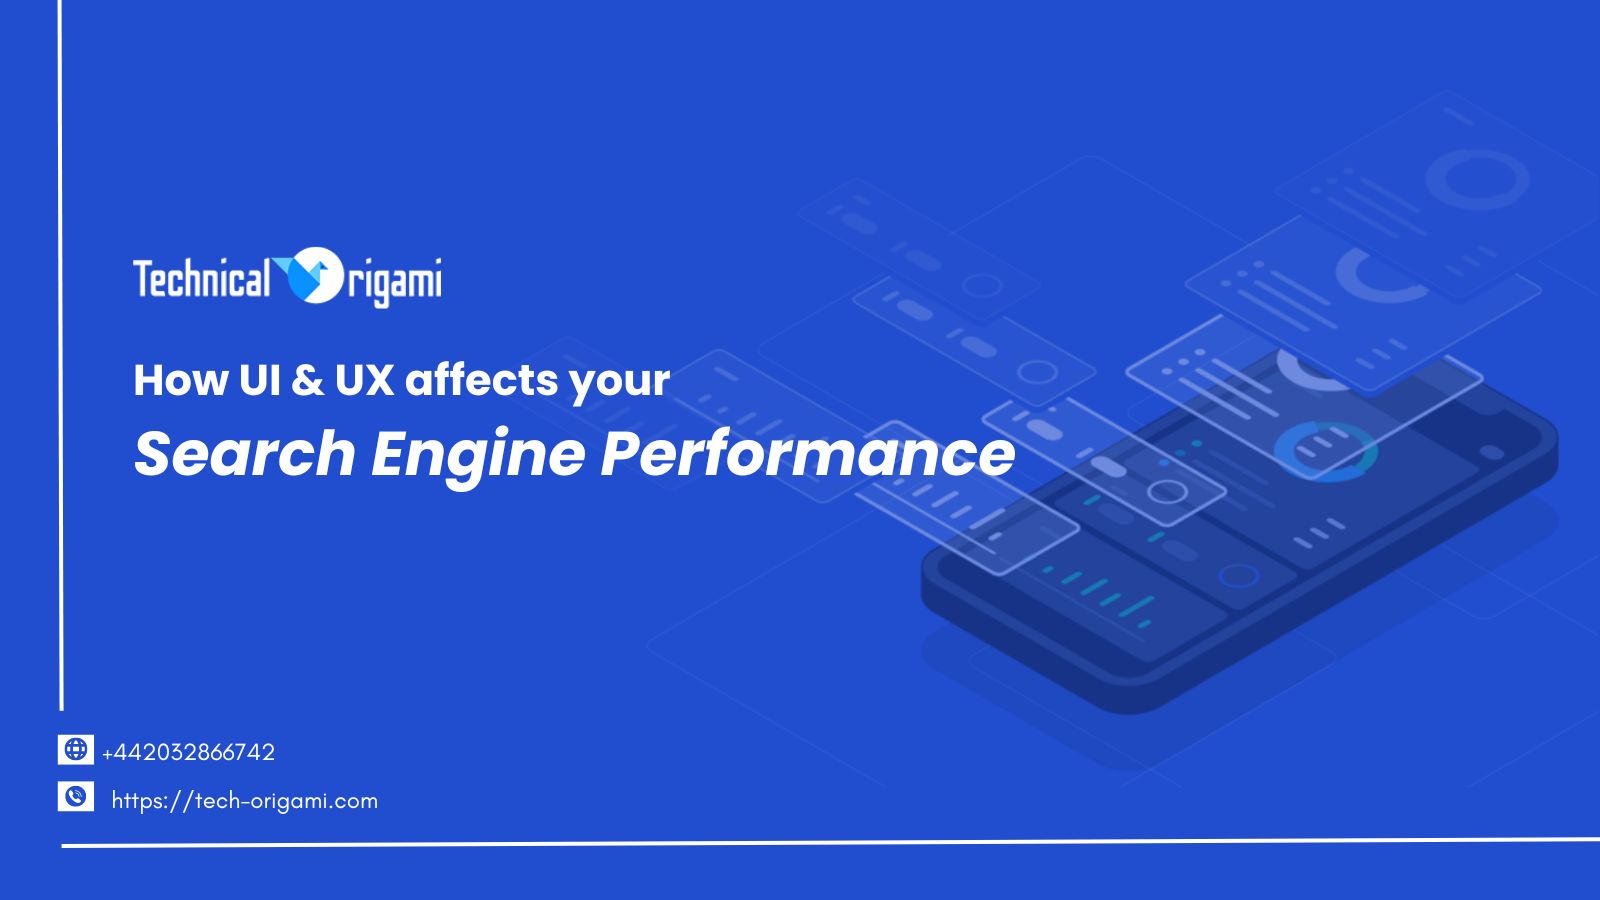 How UI & UX affects your Search Engine Performance | Technical Origami